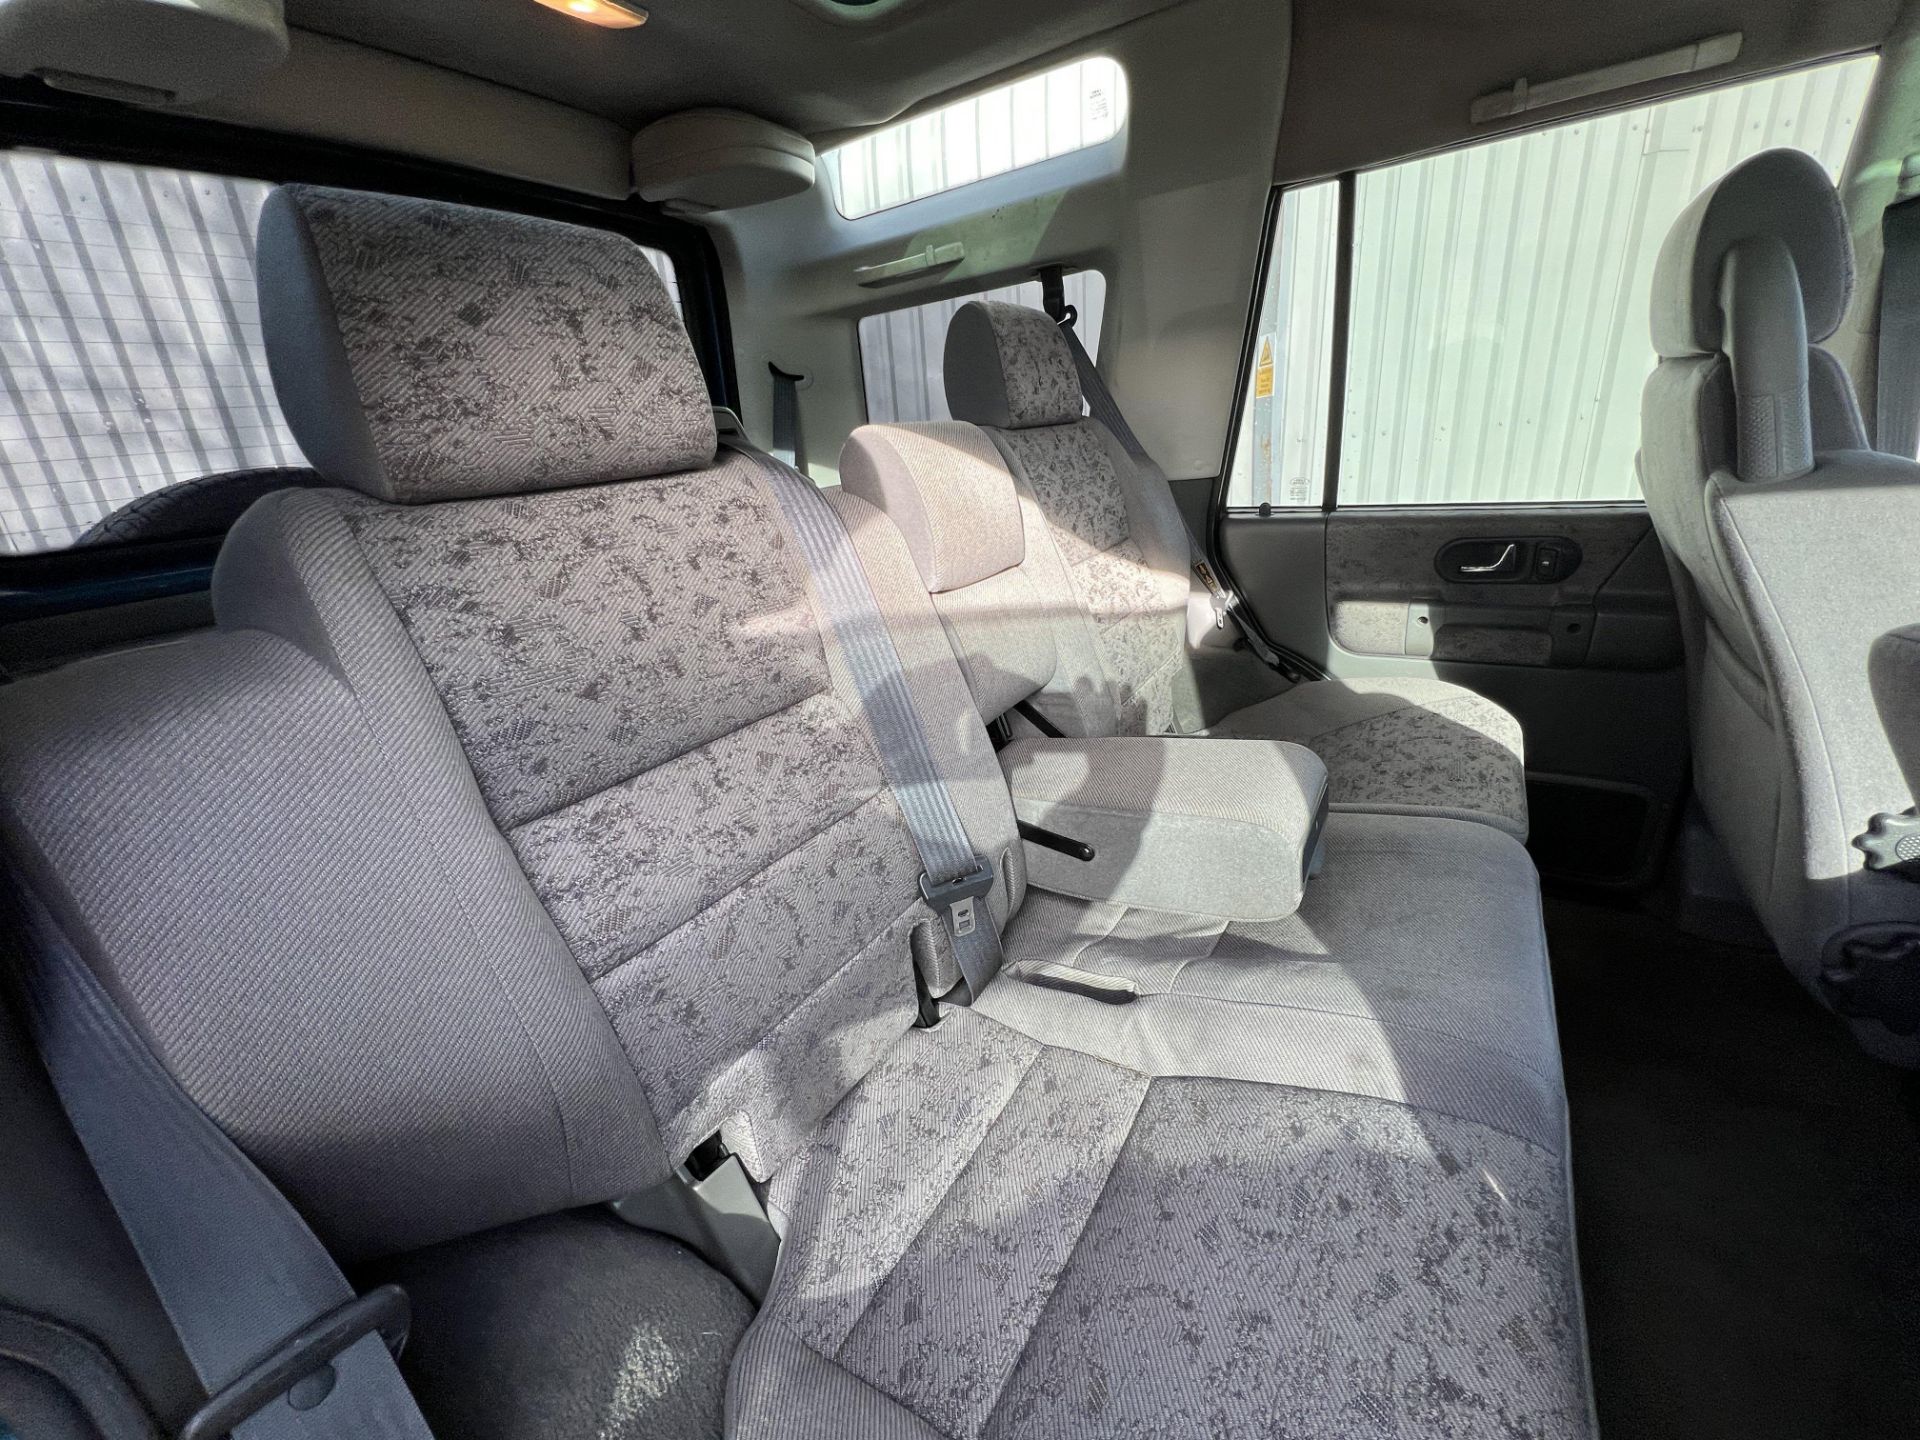 Land Rover Discovery - Image 23 of 35